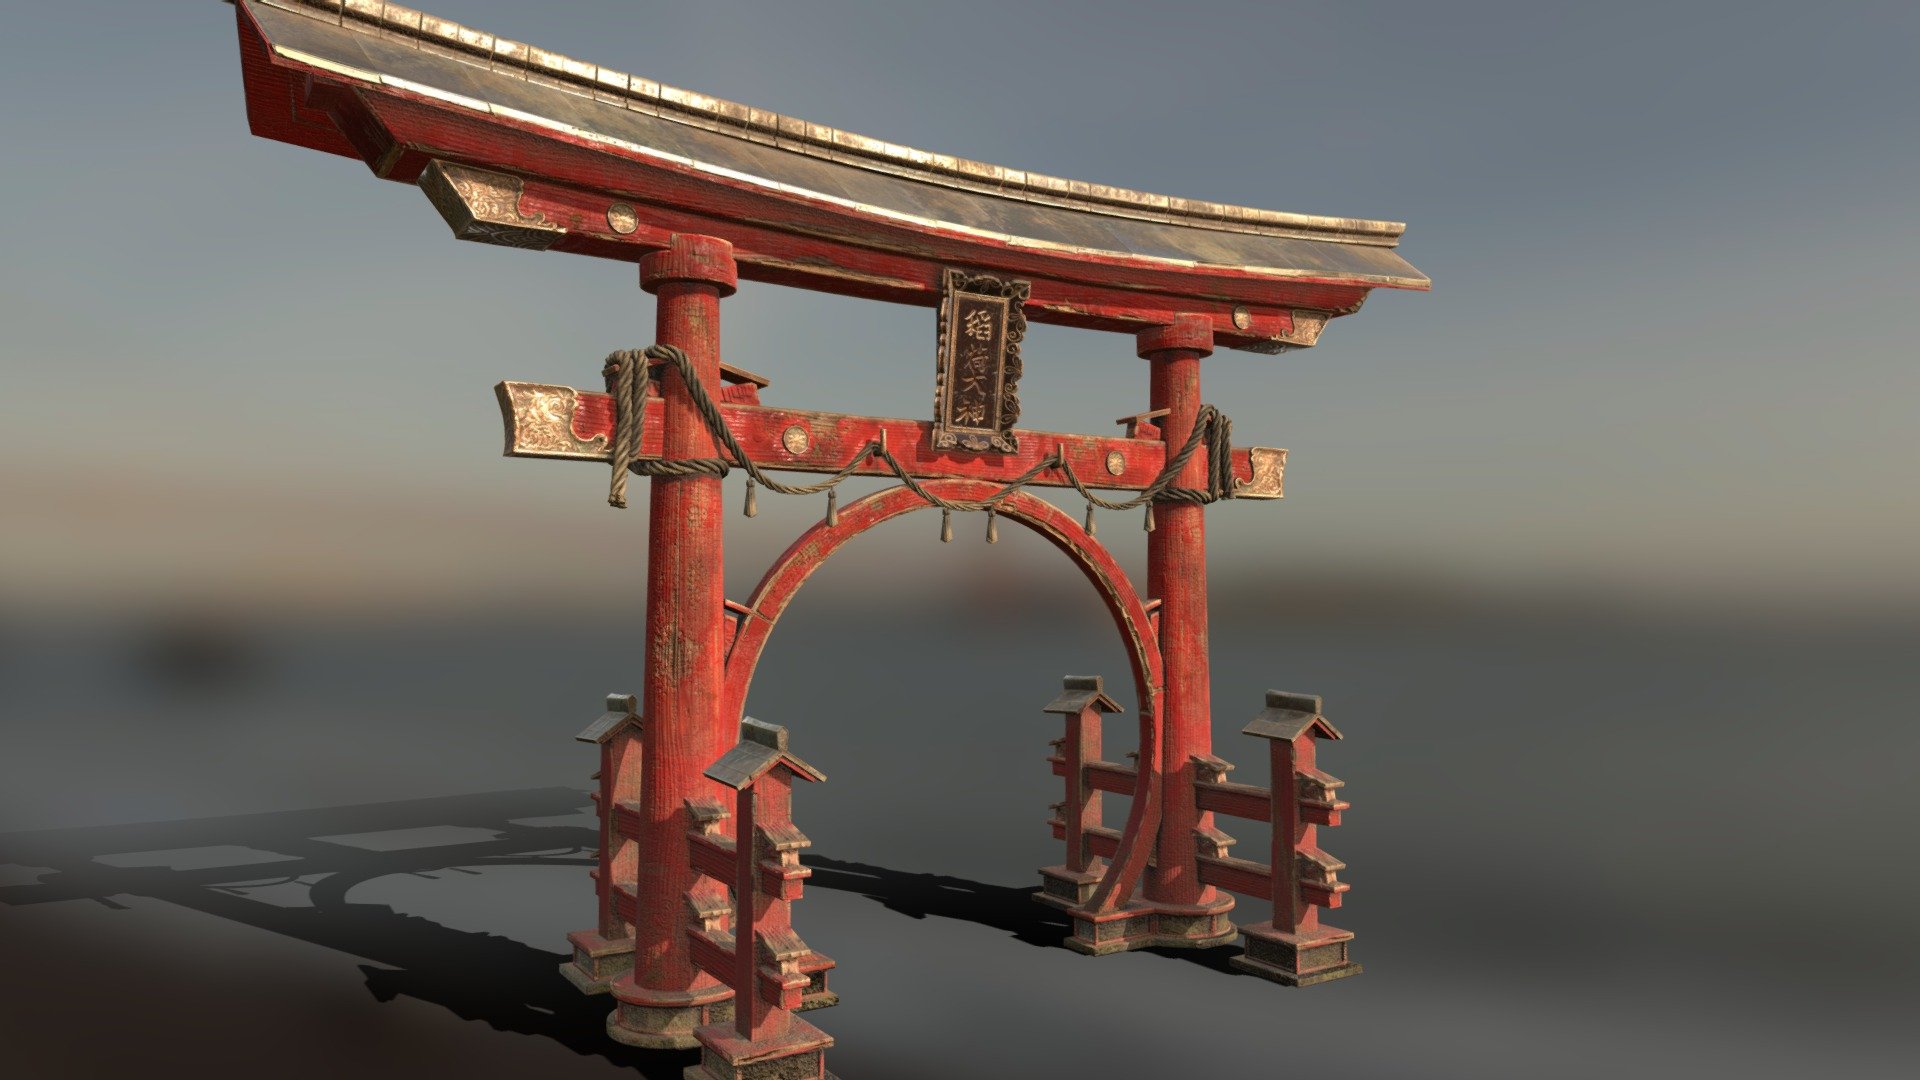 Torii gate model for an environment project I've done.
The model has 4k textures checked with PBR checker with density good texel density for a mid range shot. The model would be a great addition to your environments!
If you have any problems with the purchased model, feel free to contact me here, or via email. I'll do my best to help resolve any posiible issues!
You can check the whole project here:
The concept, that inspired the design of the gate: https://www.artstation.com/artwork/48EeYl - Torii Gate - Buy Royalty Free 3D model by Screwdriver1337 3d model